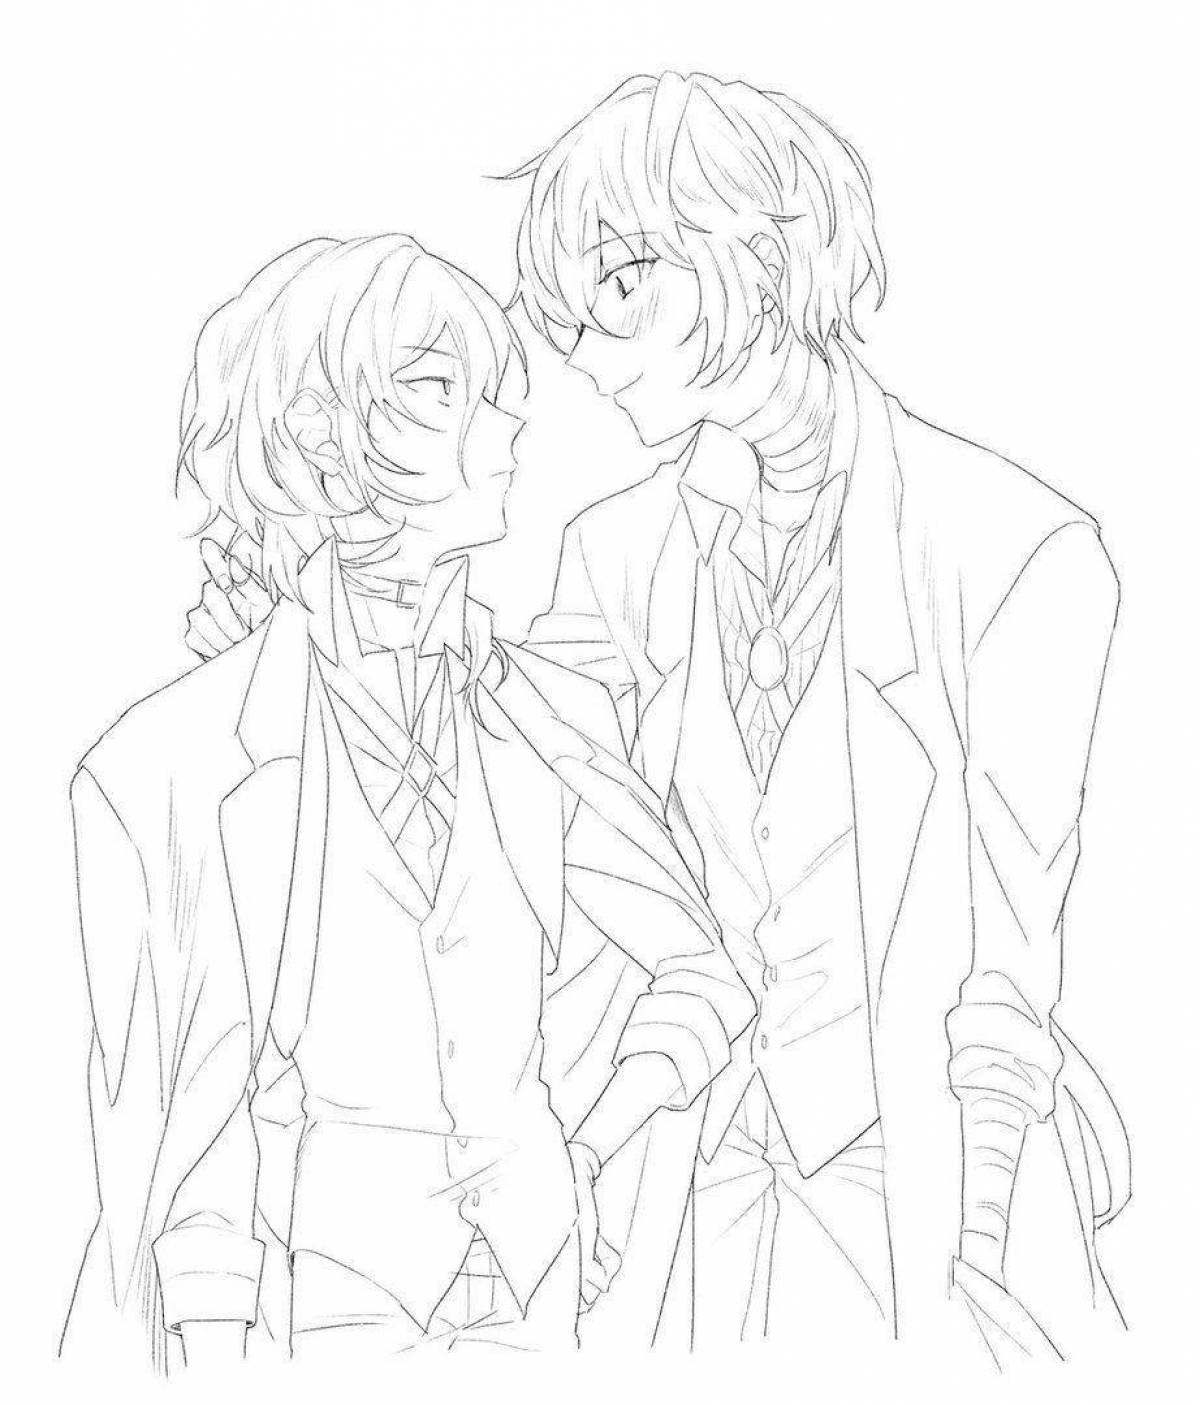 Dazai and chuya's exciting coloring book